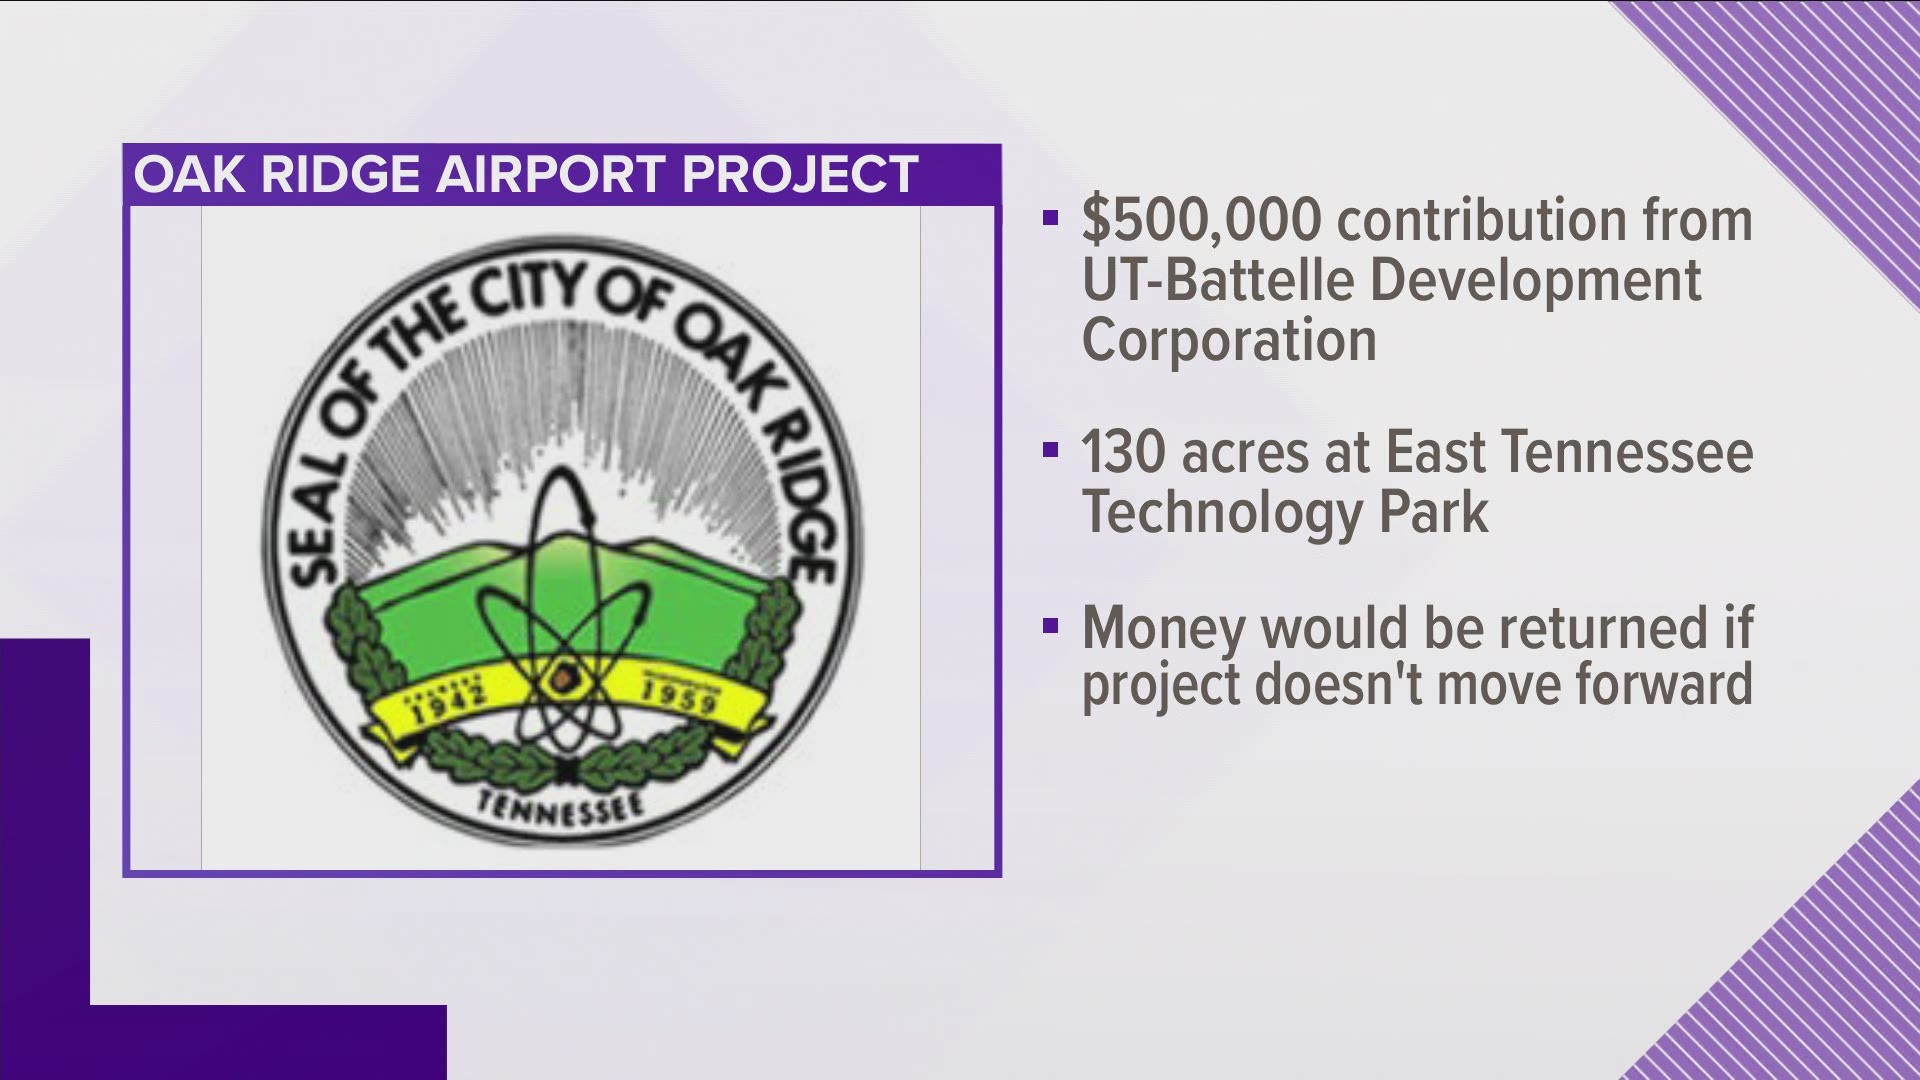 The UT Battelle Development Corporation made the contribution for the airport being planned at East Tennessee Technology Park.